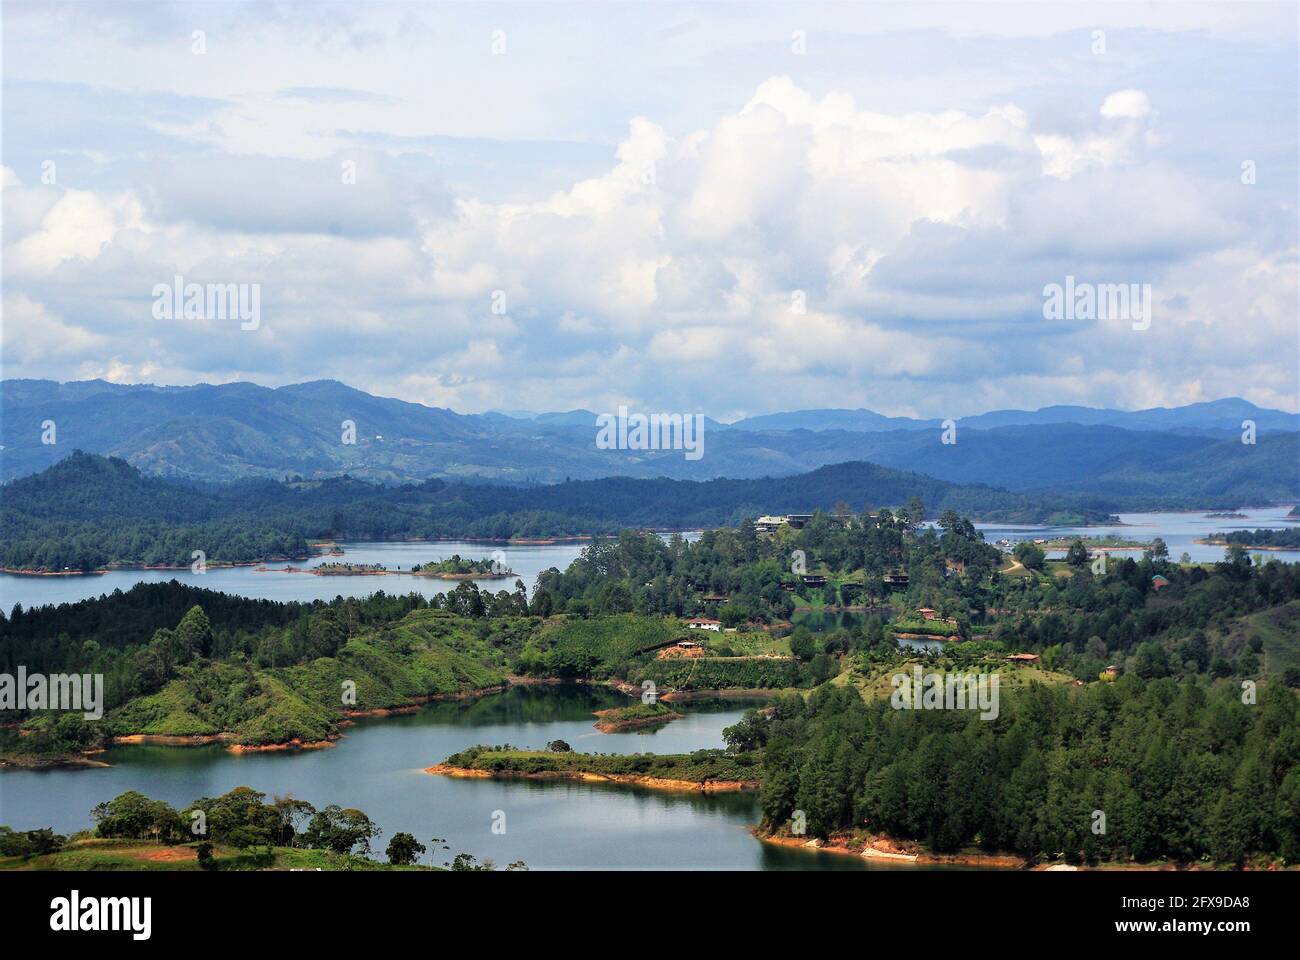 View of the reservoir from the rock formation at El Penon de Guatape, Guatape, Colombia Stock Photo